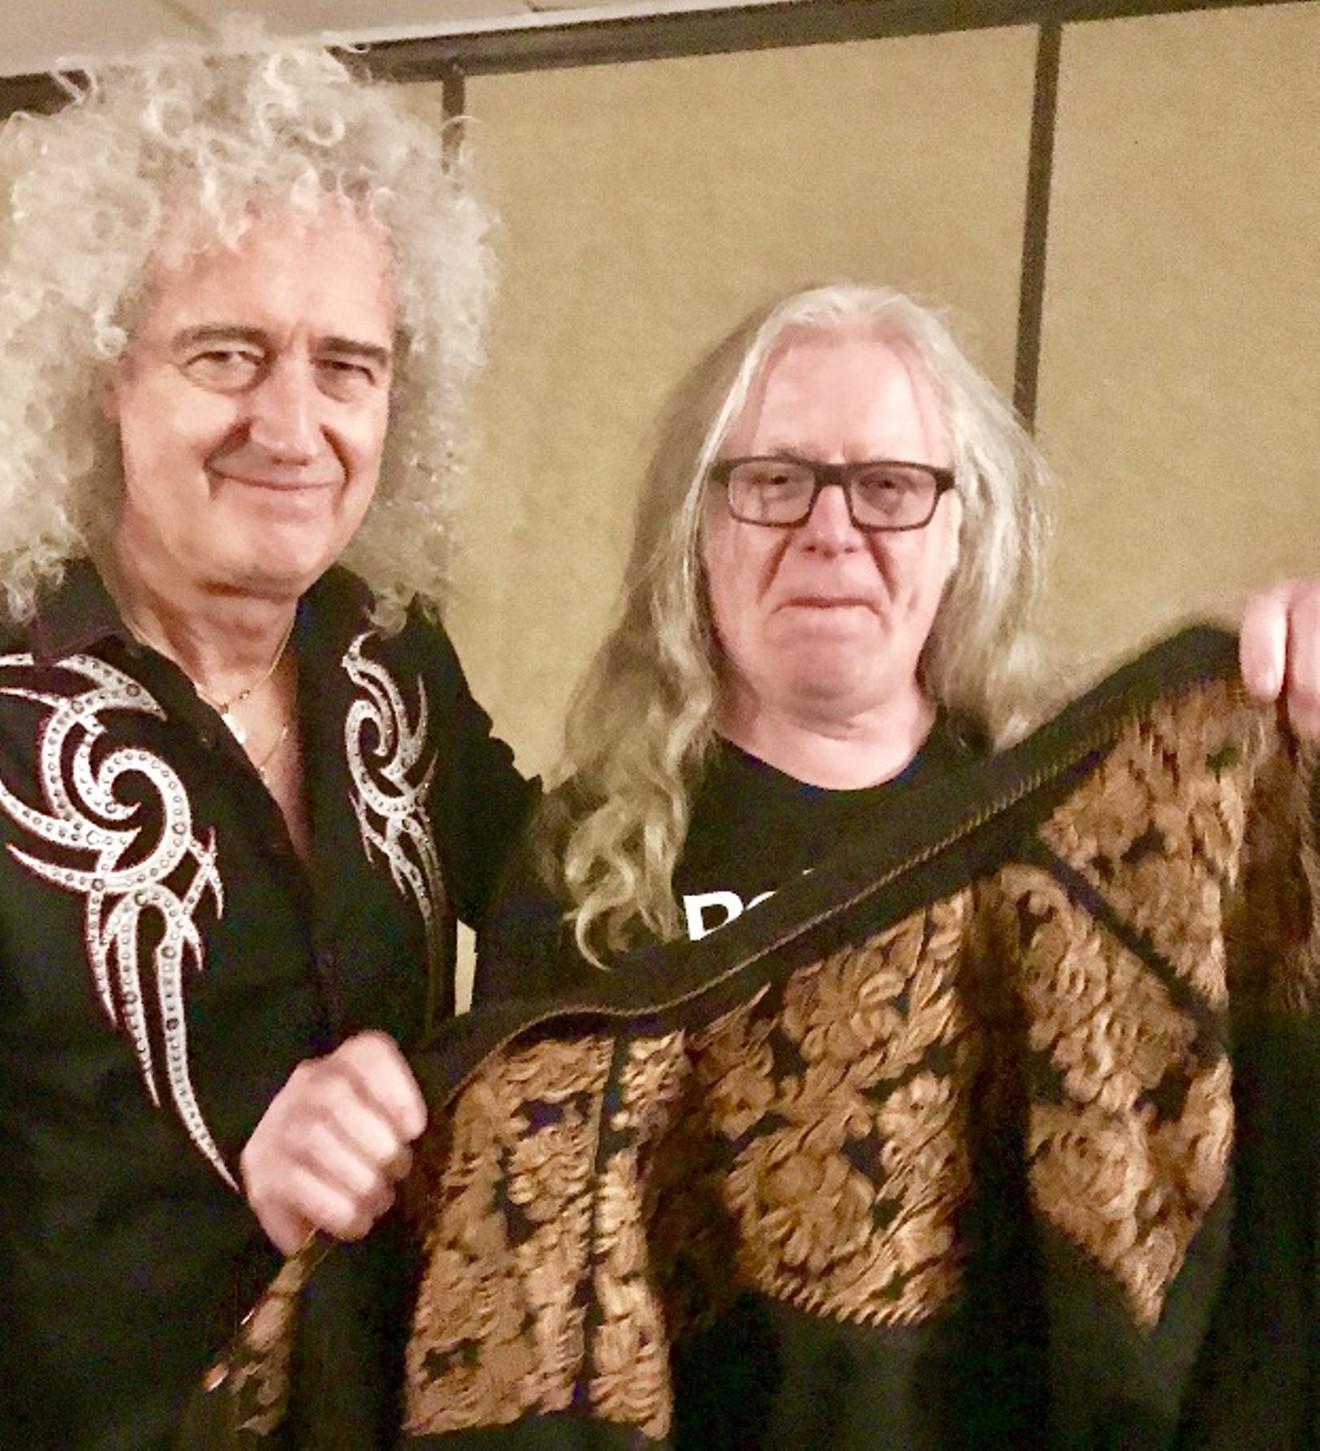 Bucks Burnett presents Queen guitarist Brian May with the shirt off his back.